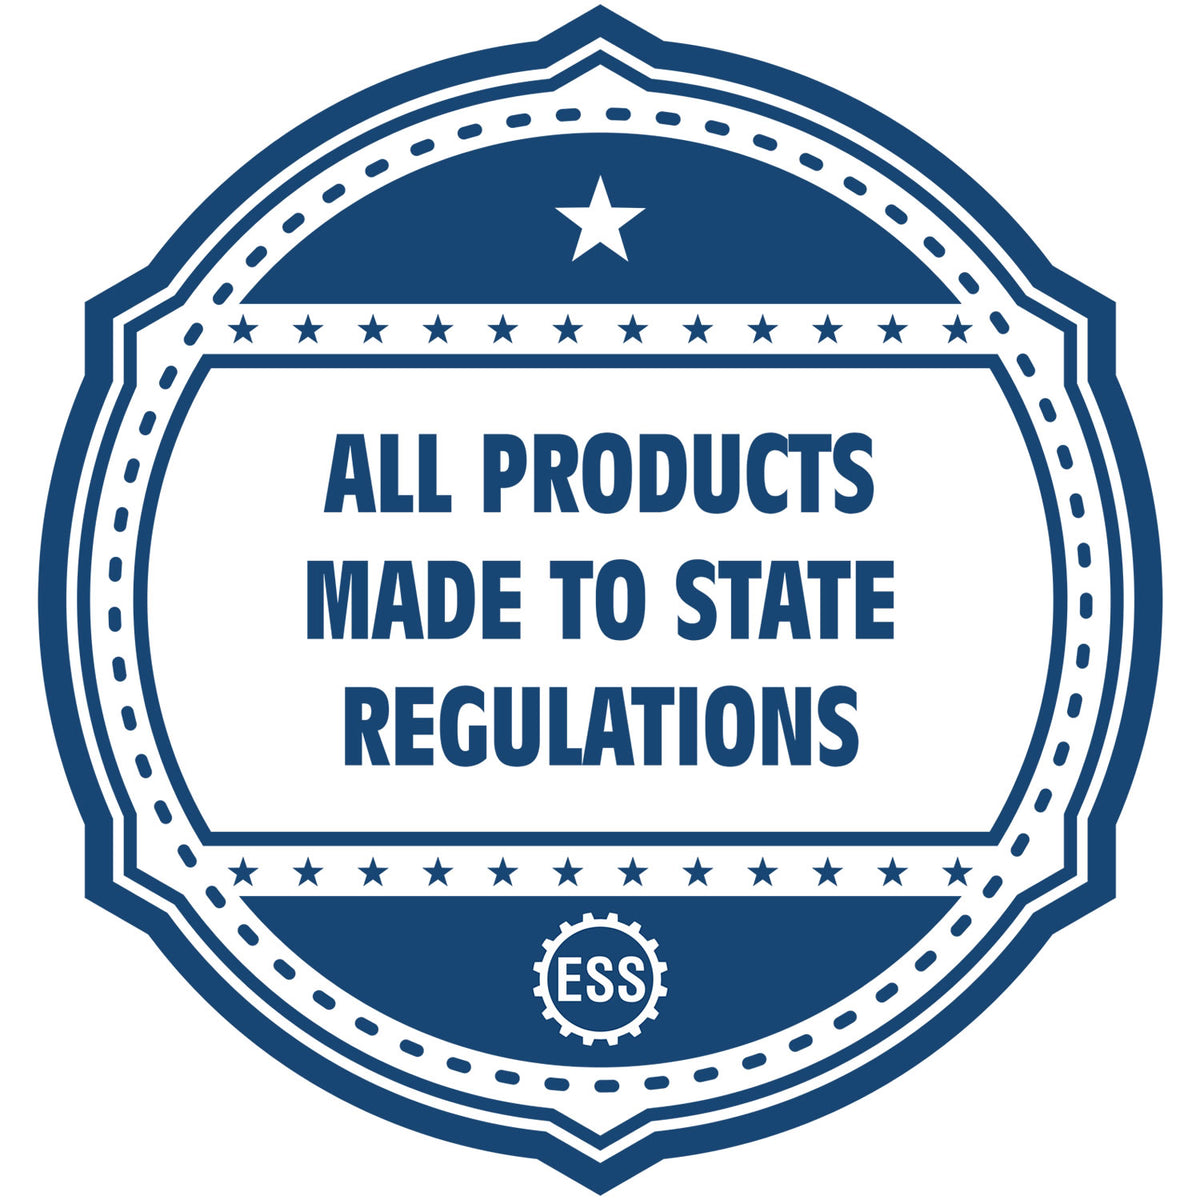 An icon or badge element for the Heavy Duty Cast Iron New Jersey Engineer Seal Embosser showing that this product is made in compliance with state regulations.